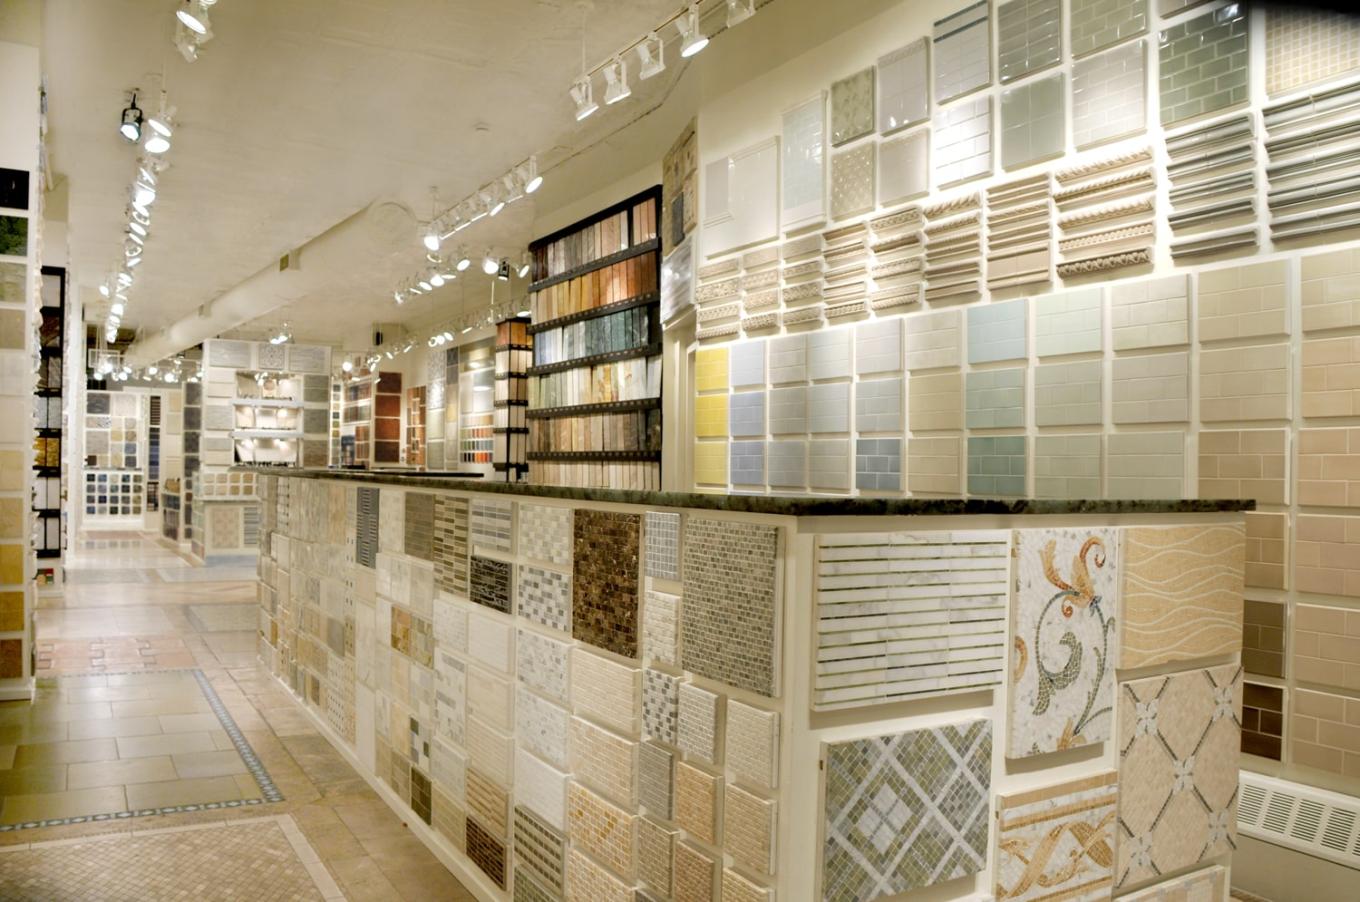 The entrance to the Complete Tile Collection NYC showroom, featuring the Vermeere Ceramic displays and many timeless mosaic patterns.